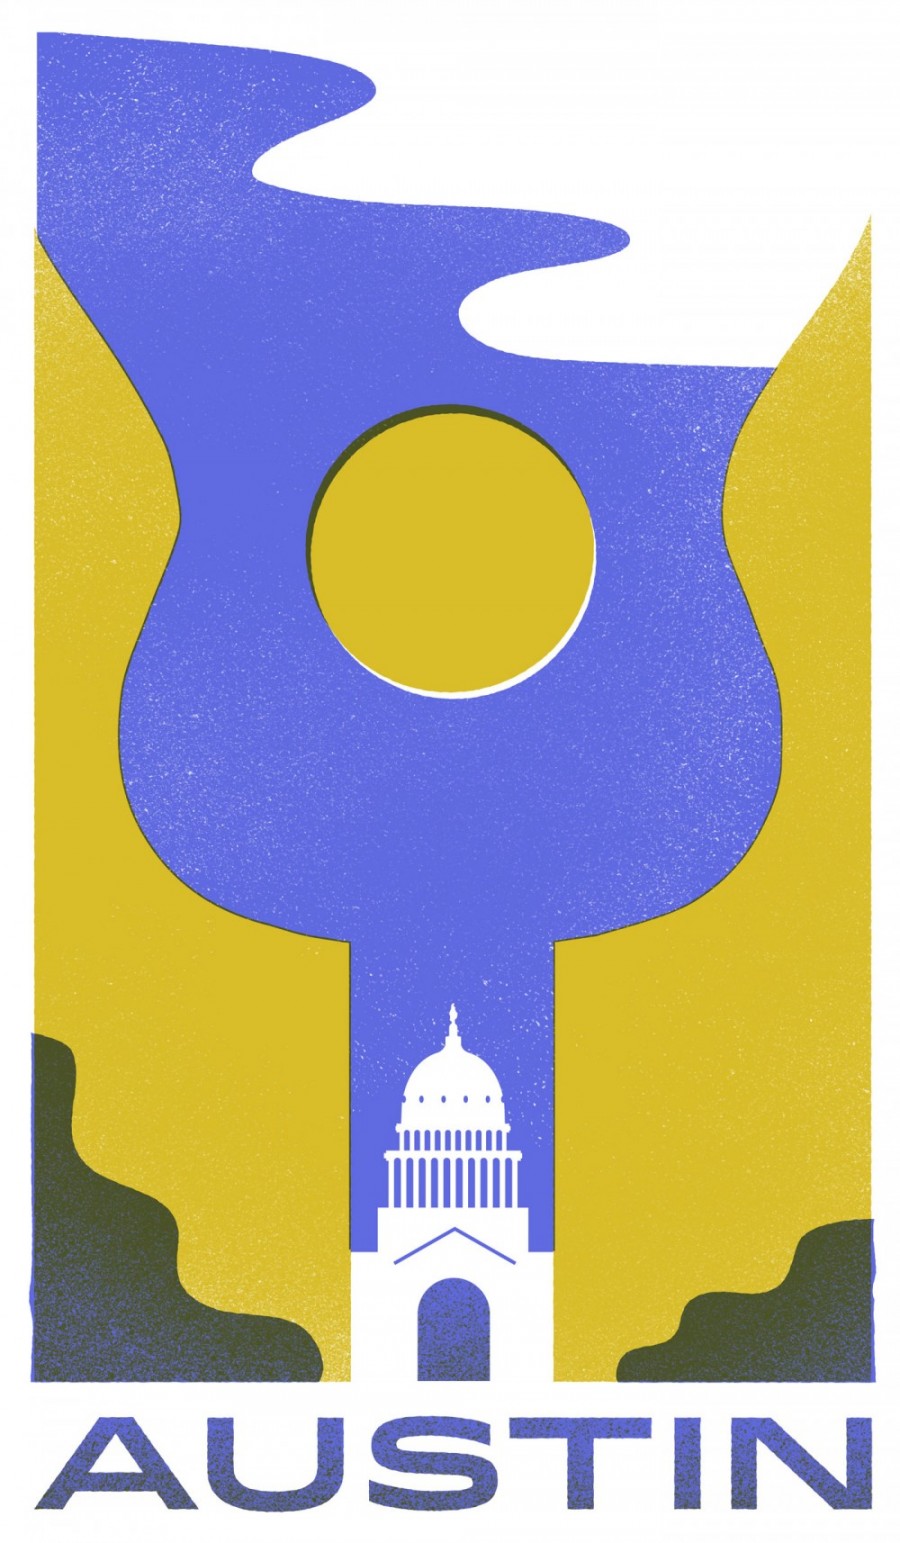 Austin, Texas - Travel Poster Series - The Heads of State